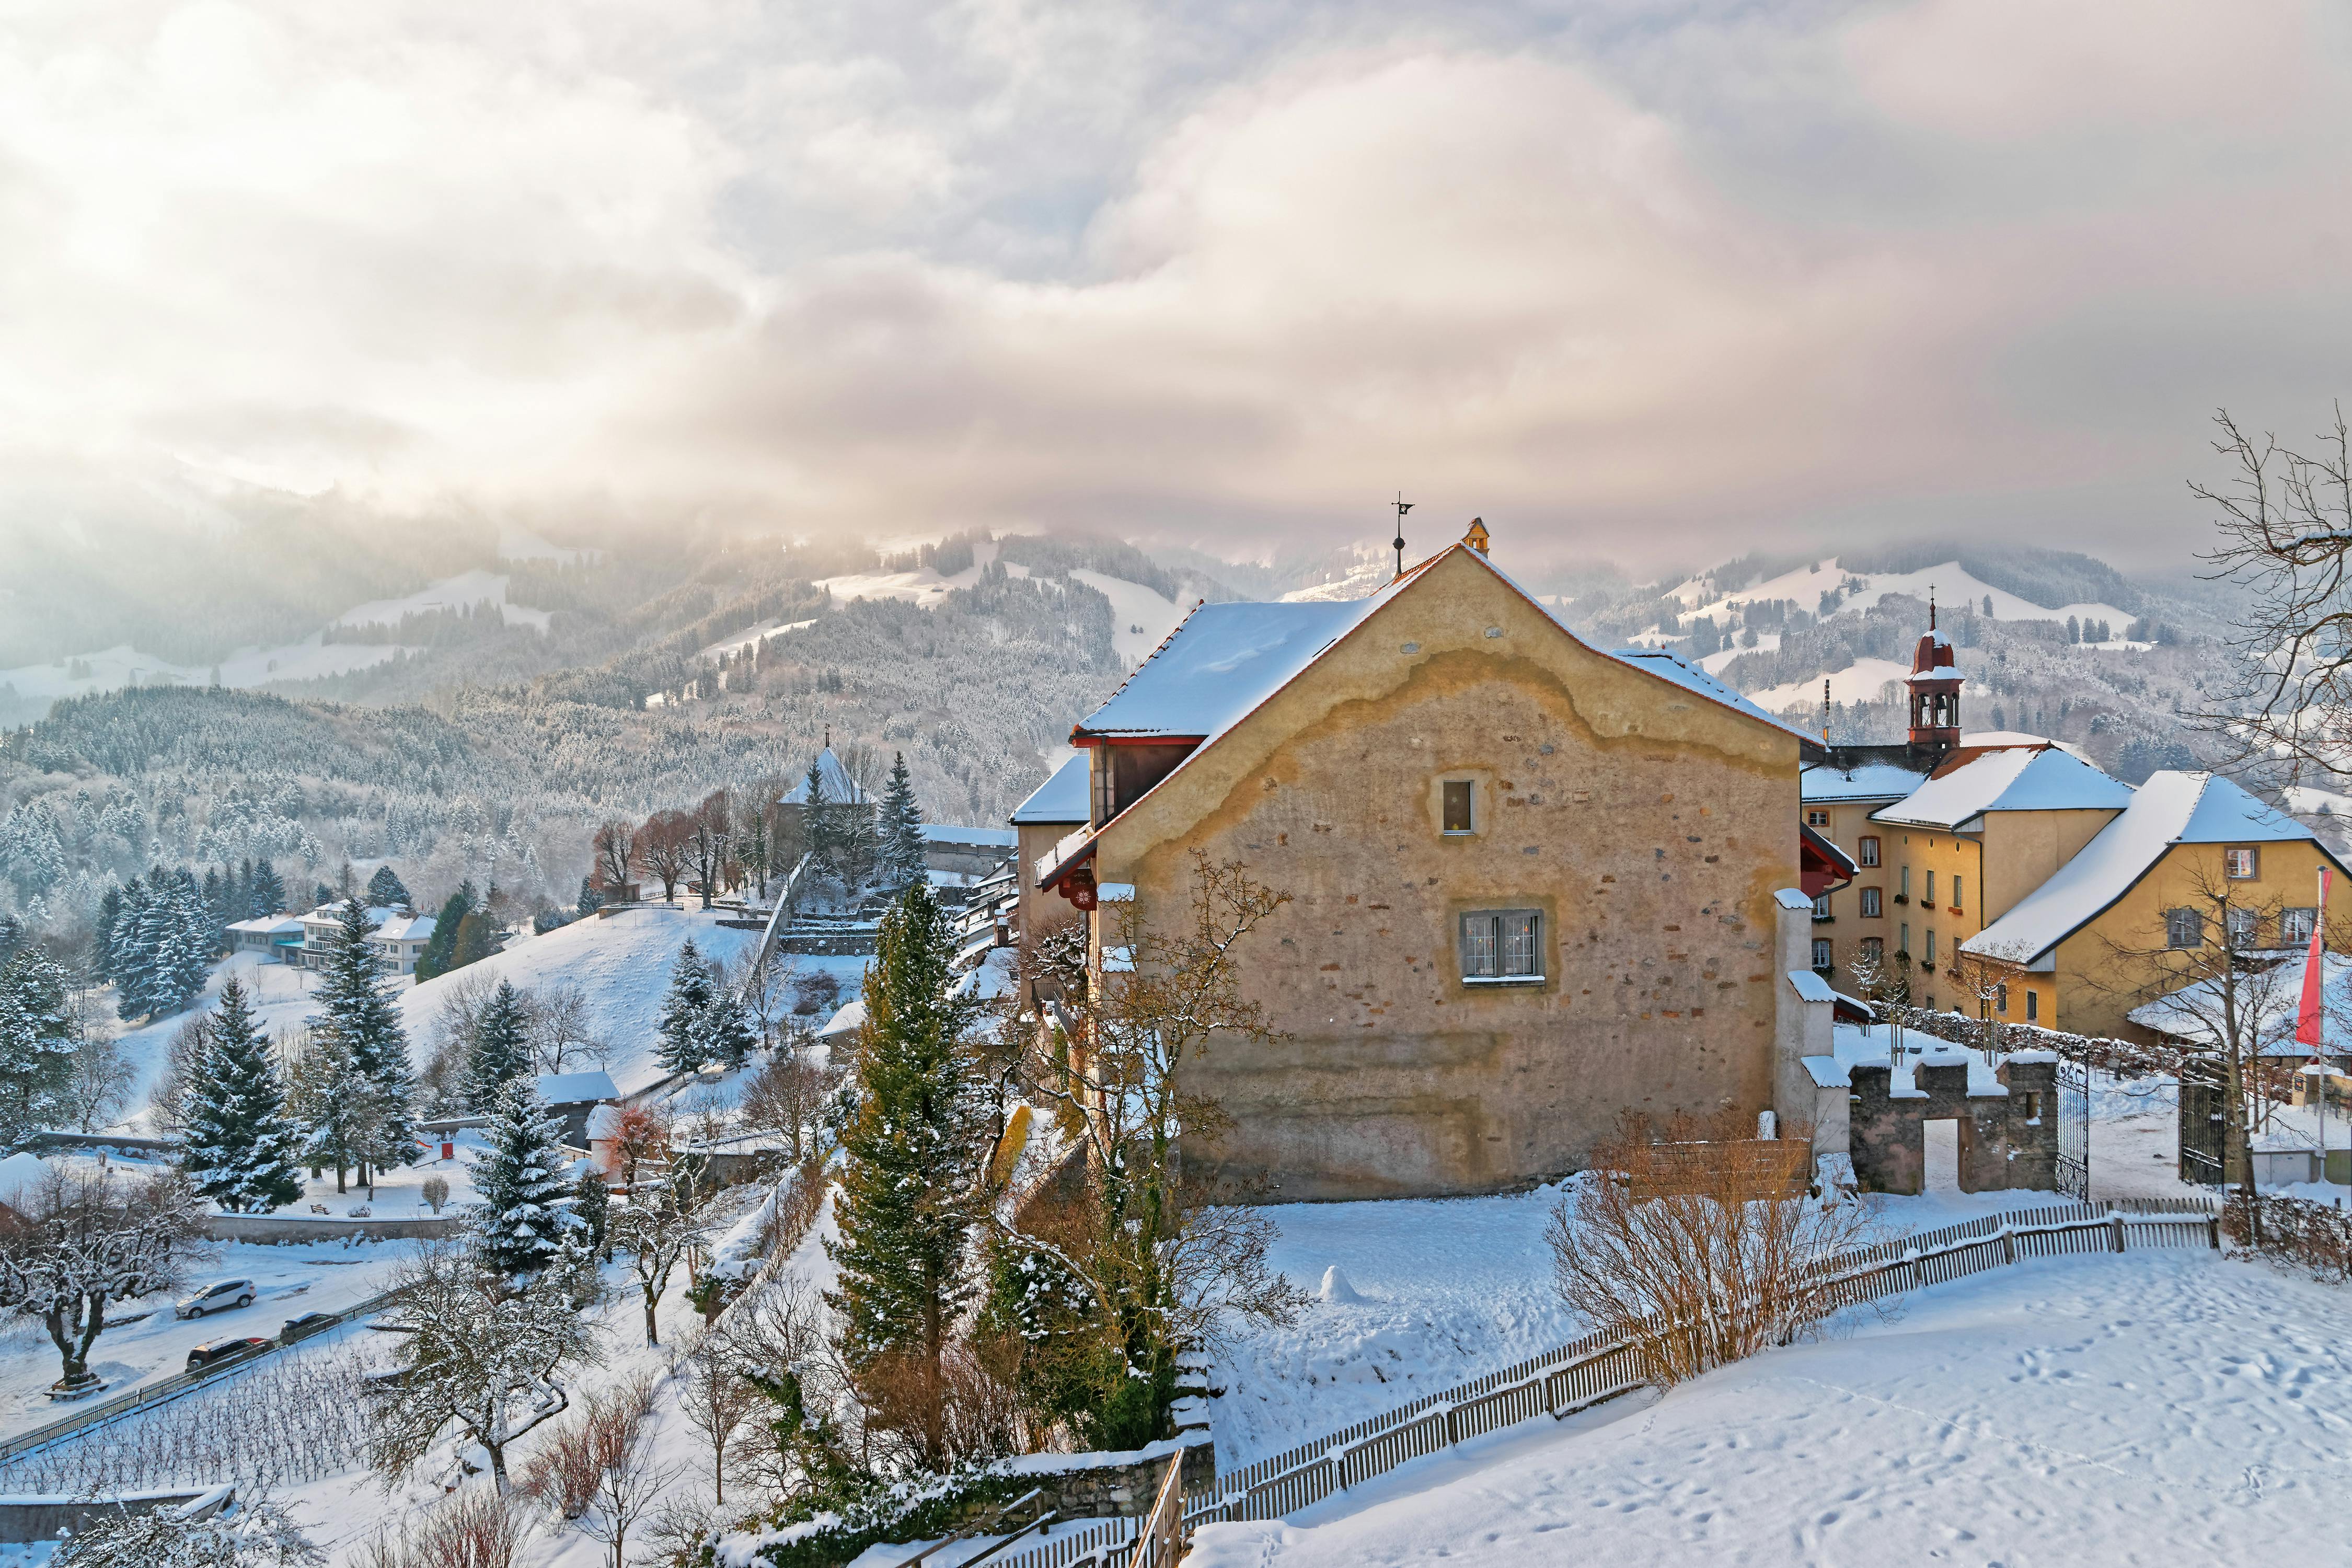 Full-day winter tour to Gruyères from Lausanne by bus